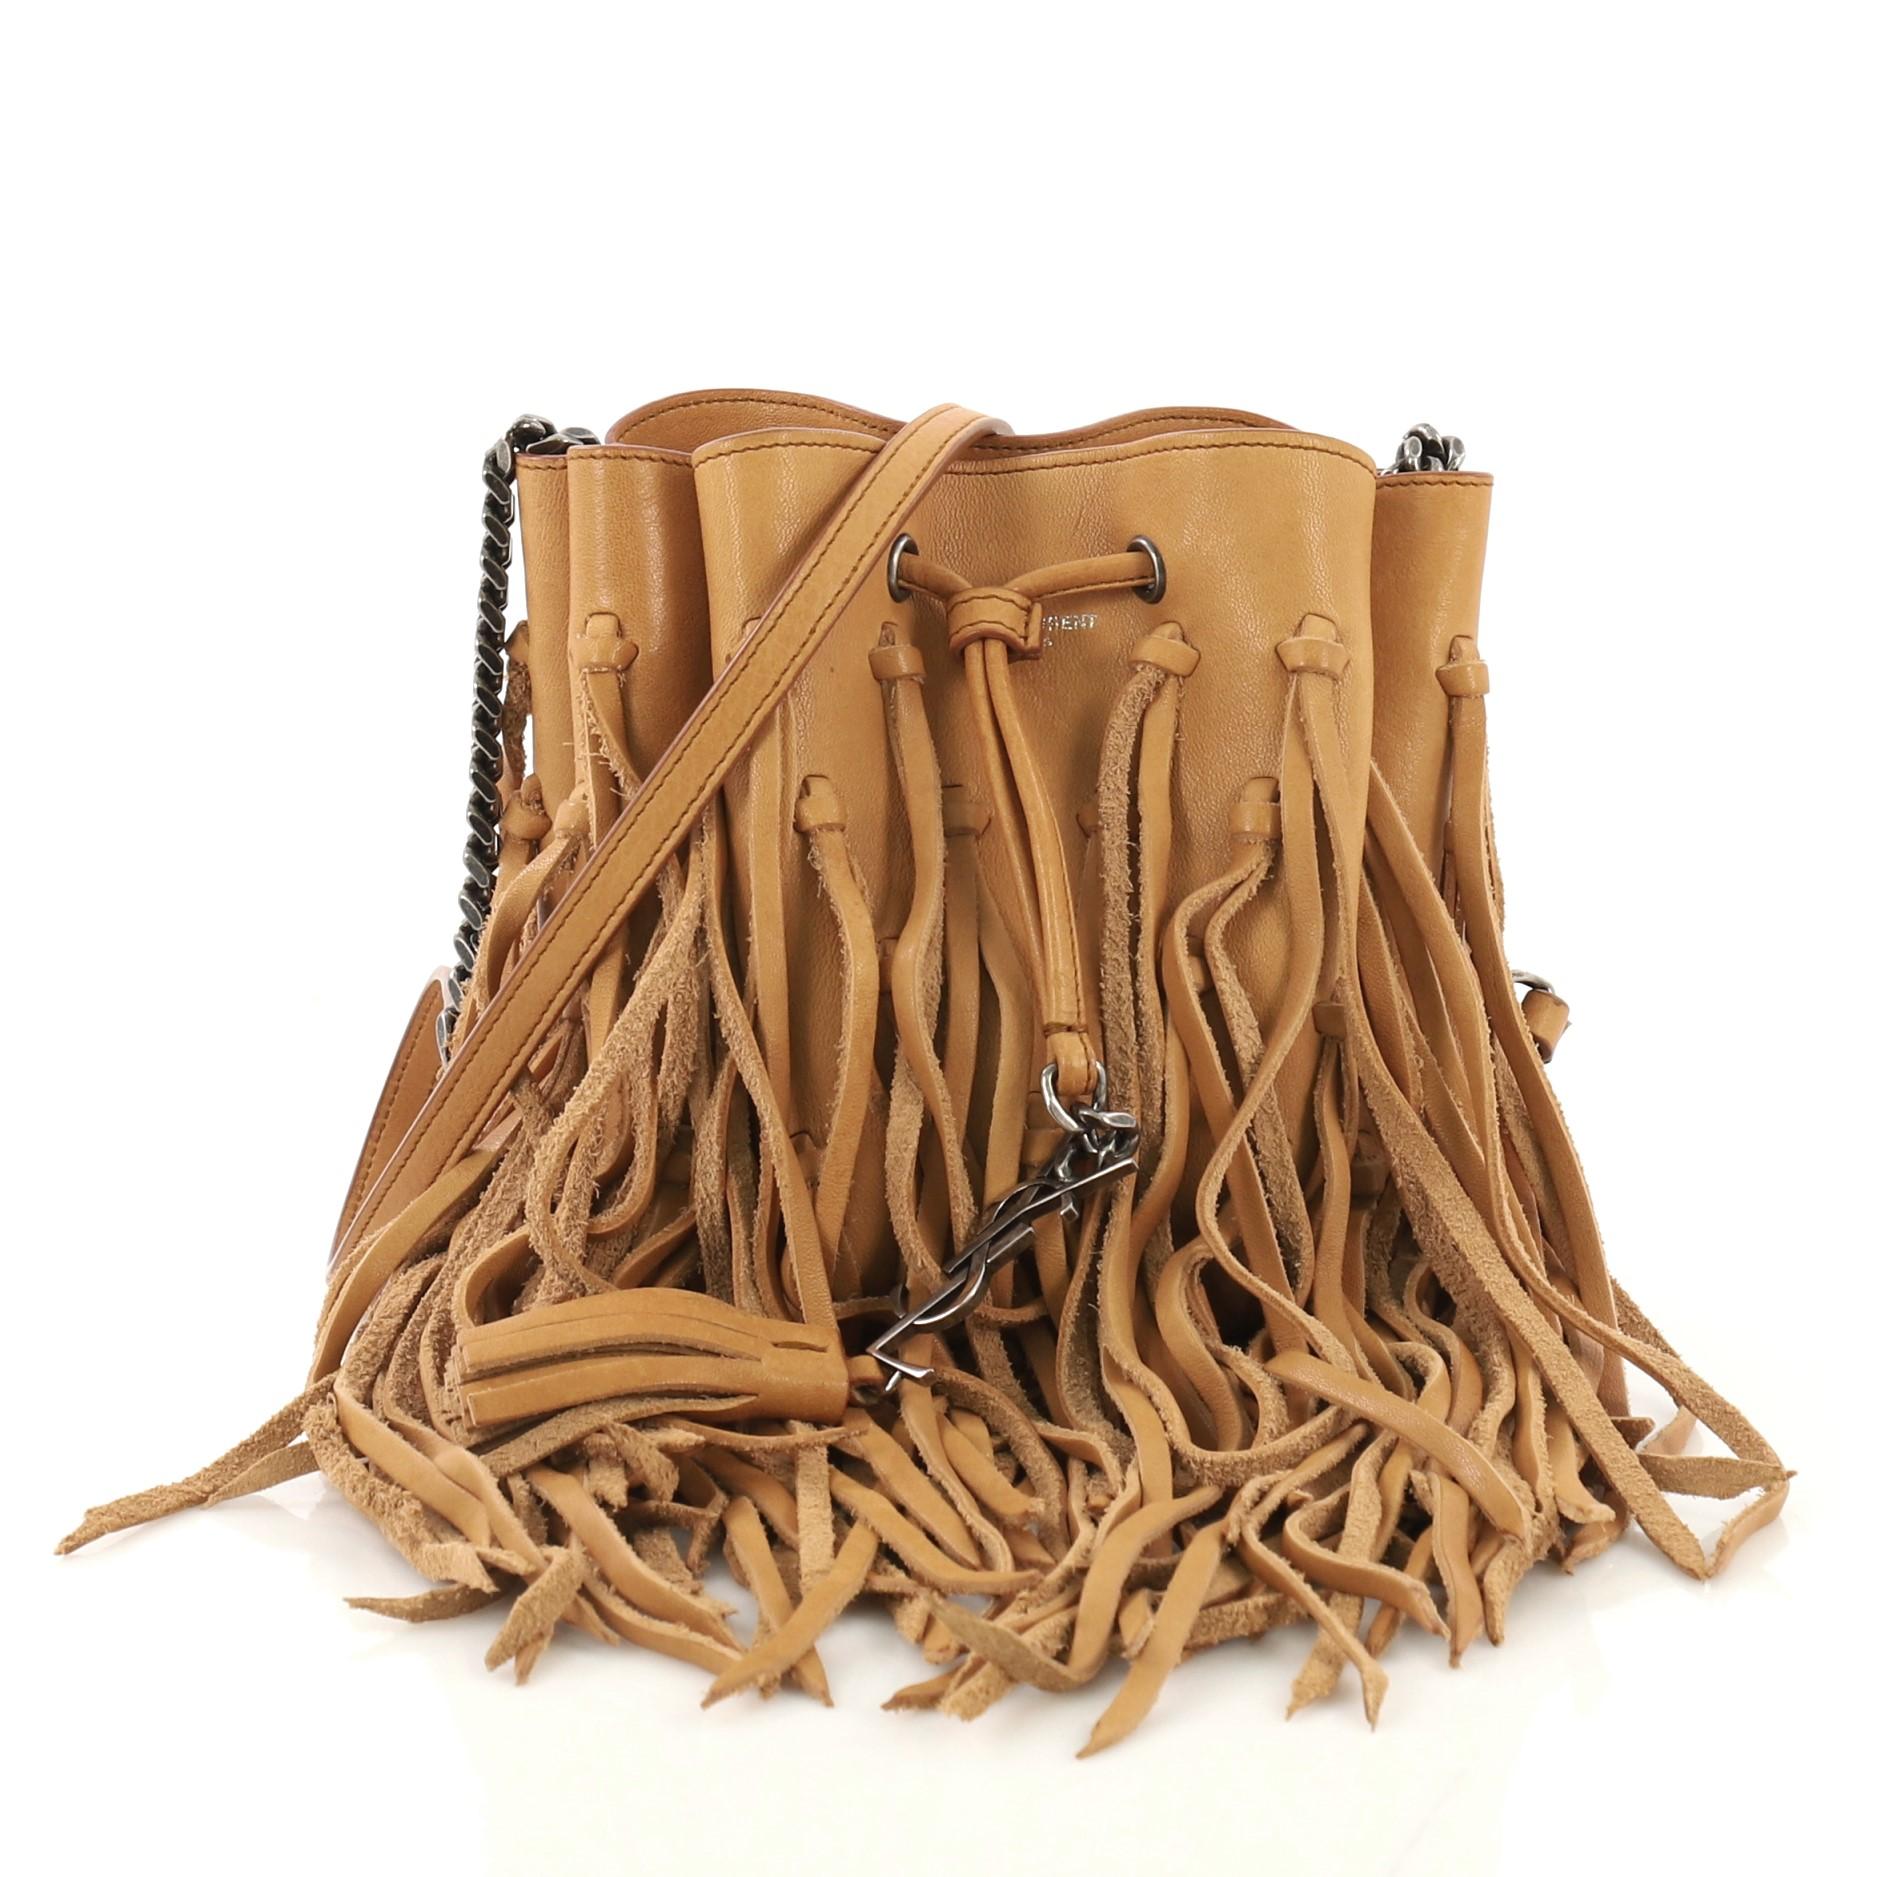 This Saint Laurent Fringe Monogram Bourse Bucket Bag Leather Mini. crafted in brown leather, features a chain and leather crossbody strap, cascading leather fringes, signature YSL logo and aged silver-tone hardware. Its drawstring closure opens to a